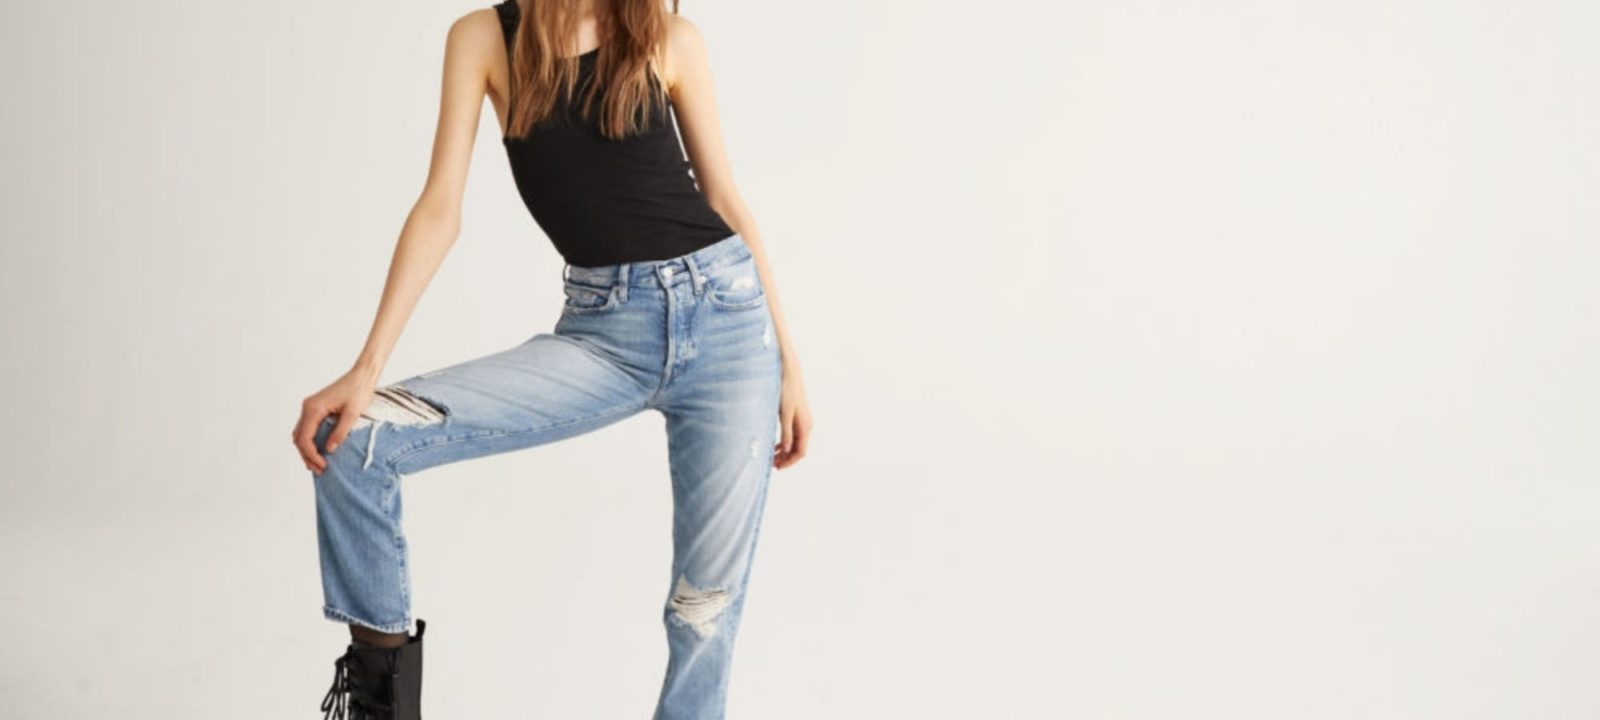 20 More Ethical and Sustainable Denim Brands Made in the US - Good On You